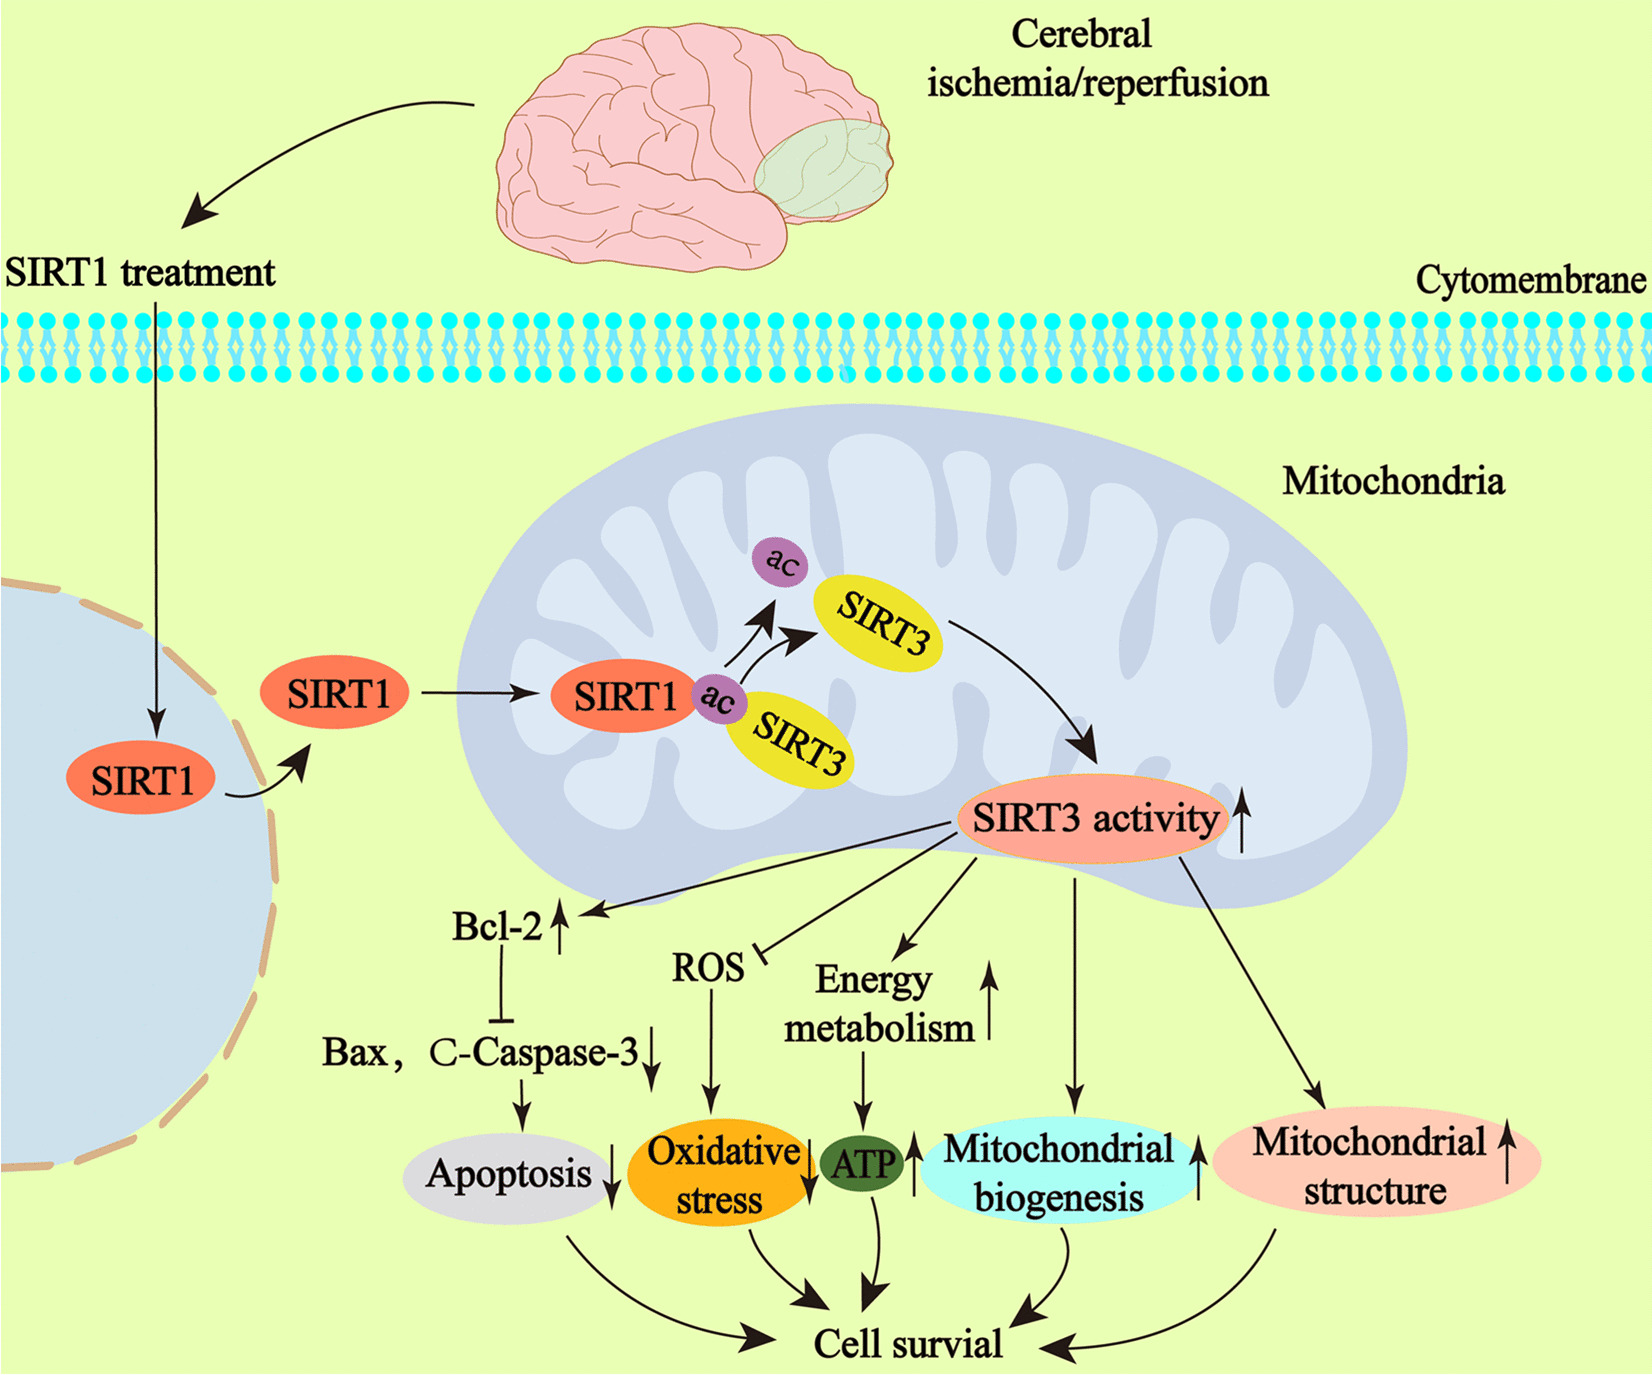 SIRT1 restores mitochondrial structure and function in rats by activating SIRT3 after cerebral ischemia/reperfusion injury